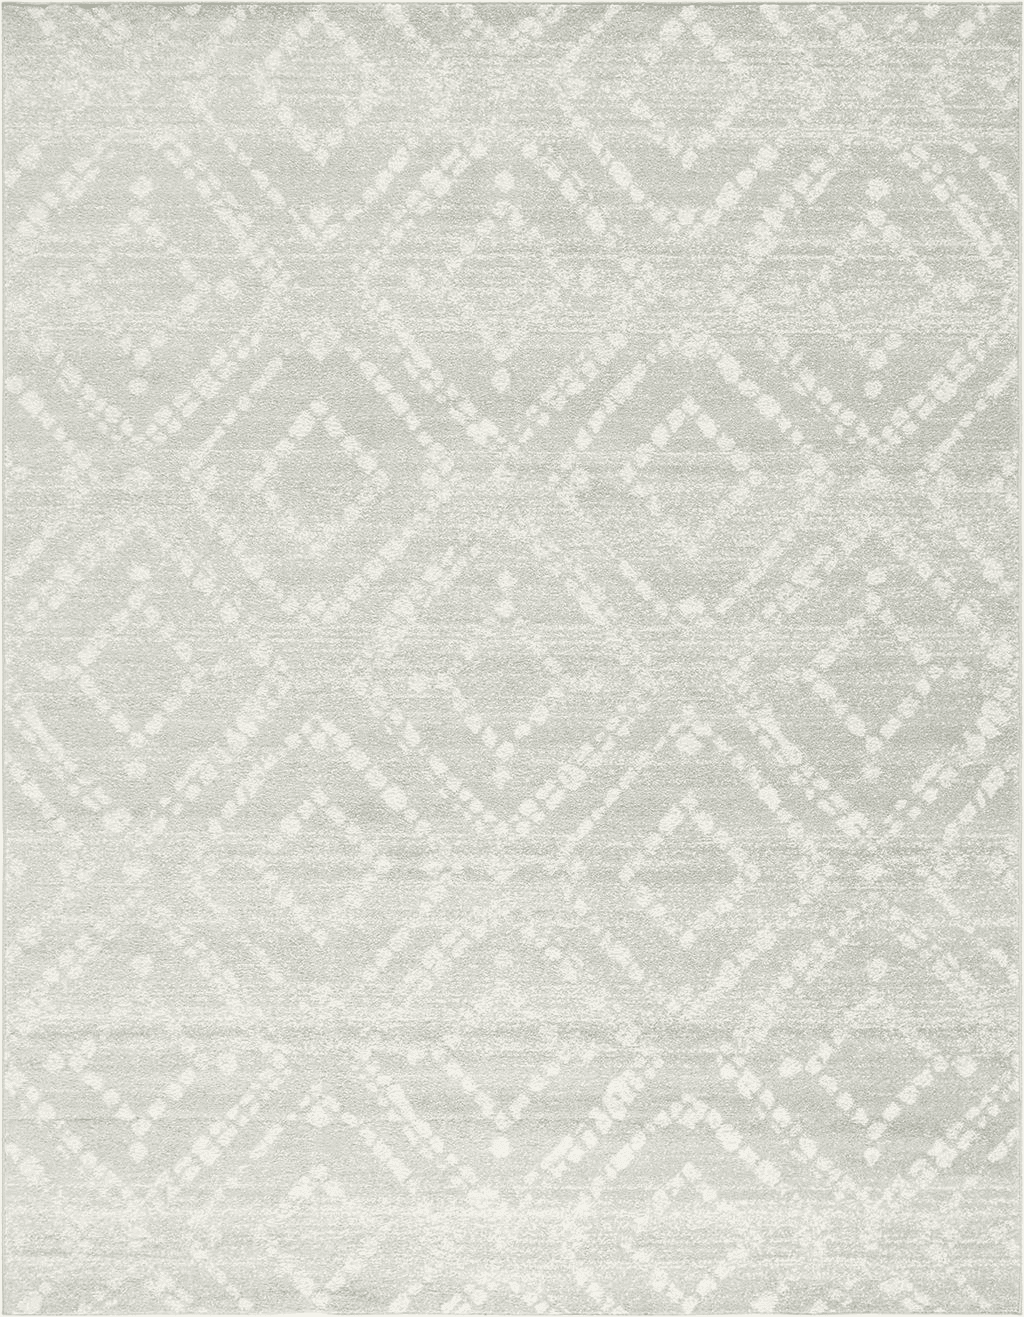 SAFAVIEH Adirondack Collection Area Rug - 9' x 12', Green & Ivory, Modern Diamond Distressed Design, Non-Shedding & Easy Care, Ideal for High Traffic Areas in Living Room, Bedroom (ADR131Y)